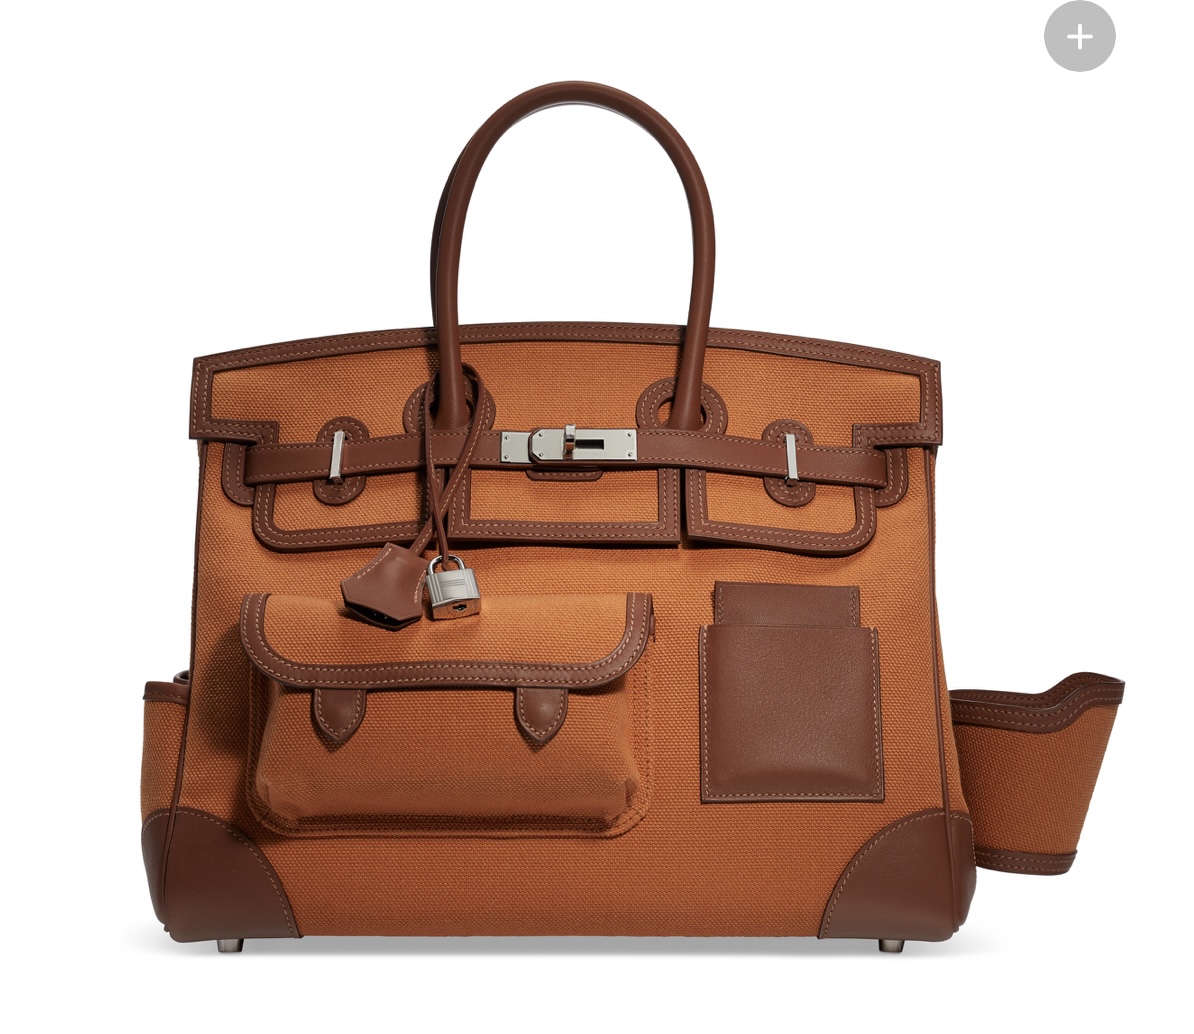 Highlights from the Hermès 2020 Annual Report - PurseBlog